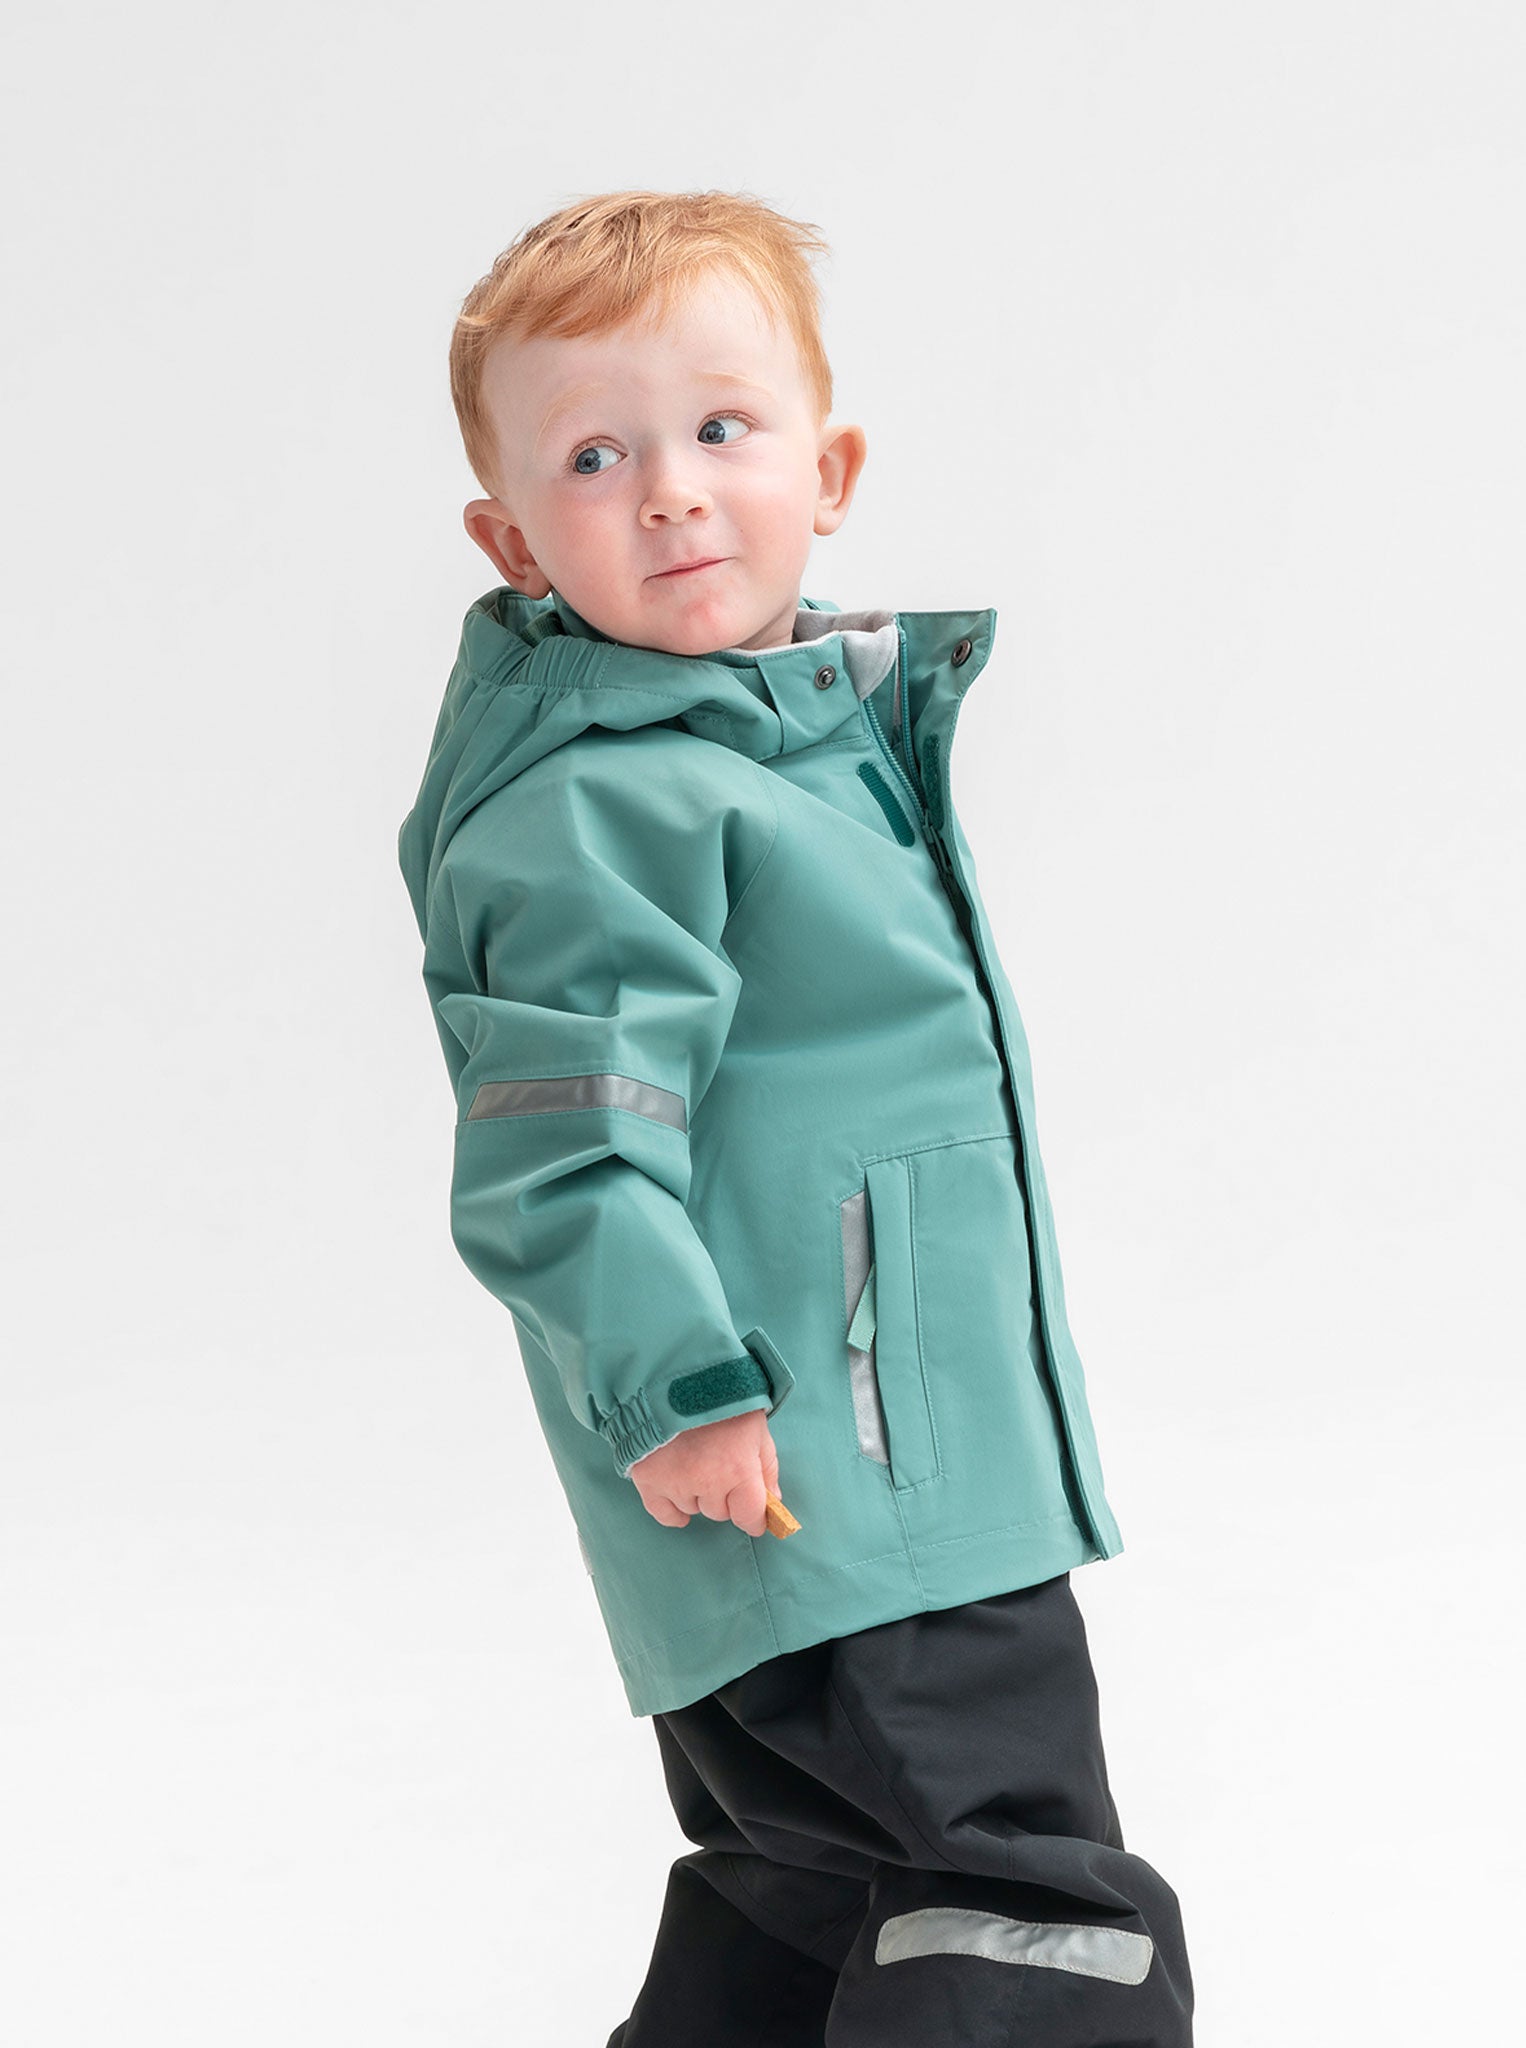 Kids waterproof shell jacket in colour green, with front pockets and detachable hood, made of lightweight and durable fabric.